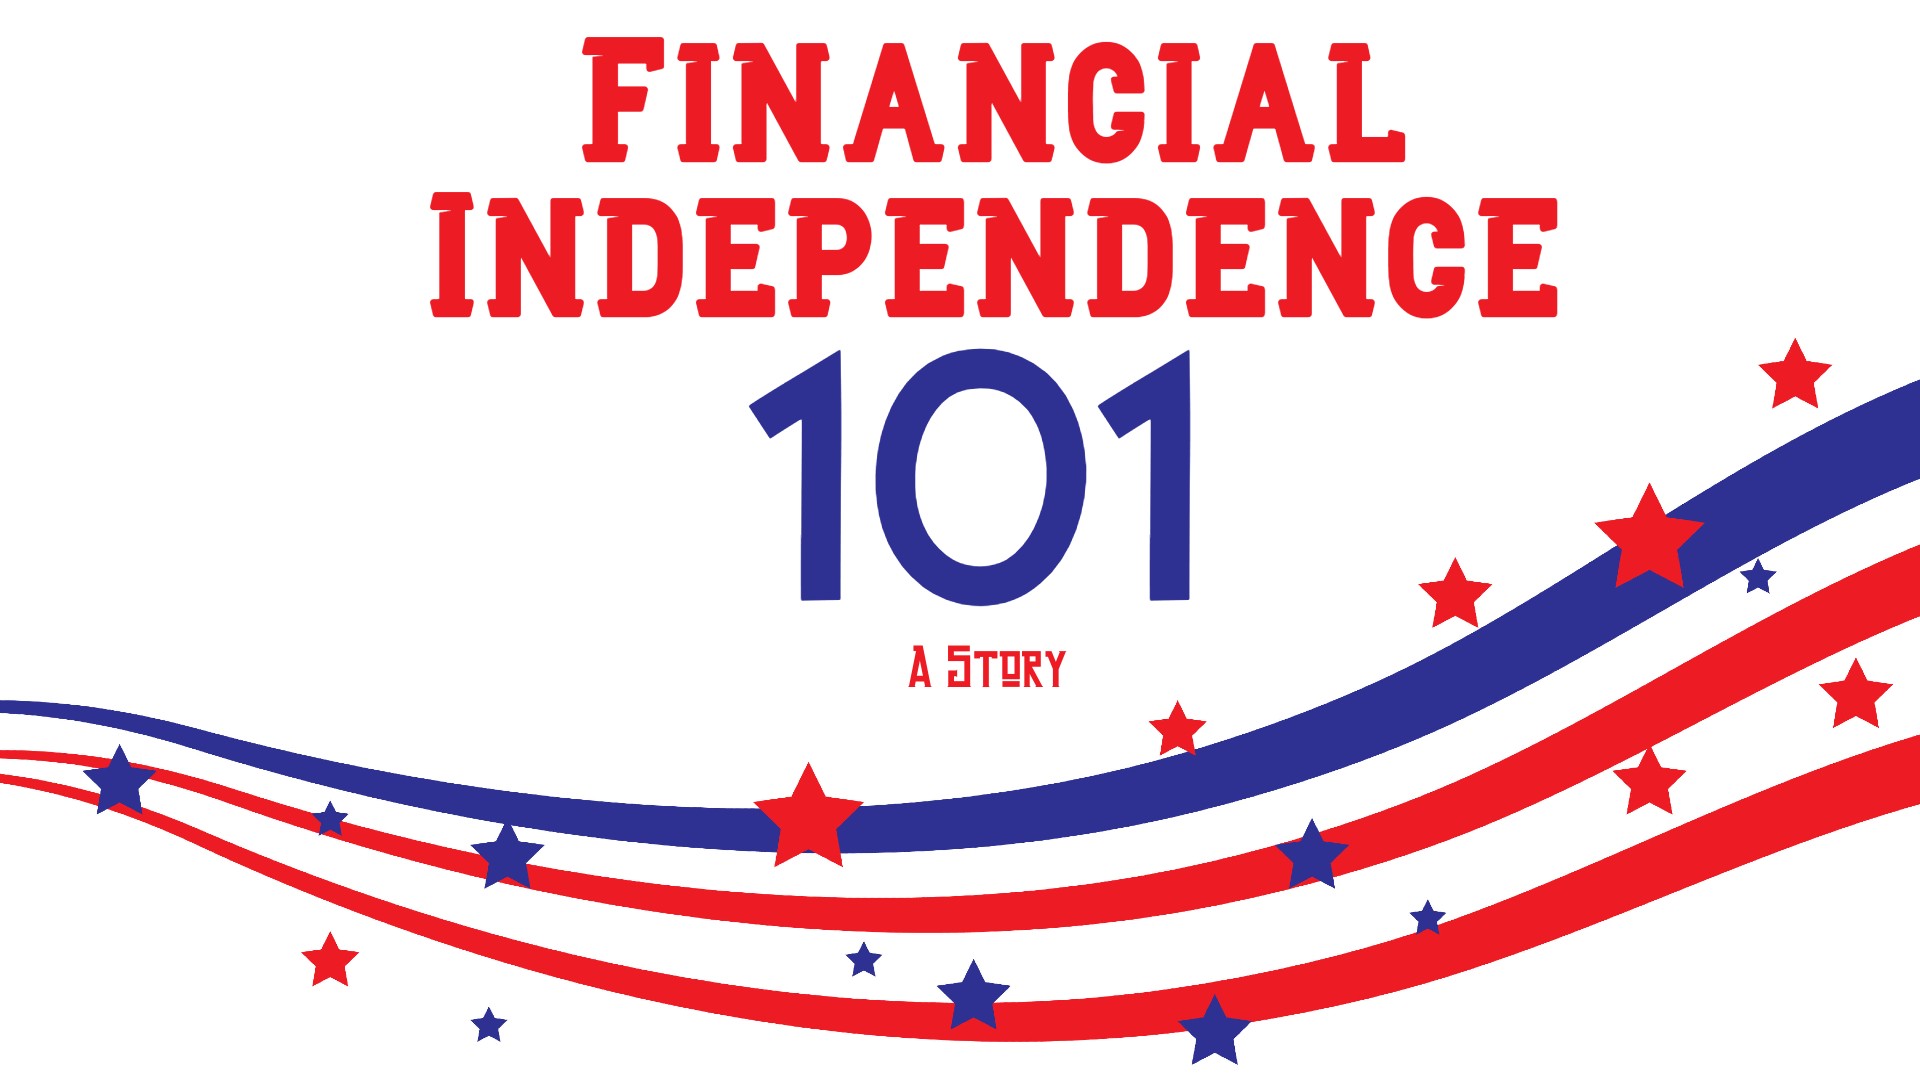 Financial Independence 101: A Story